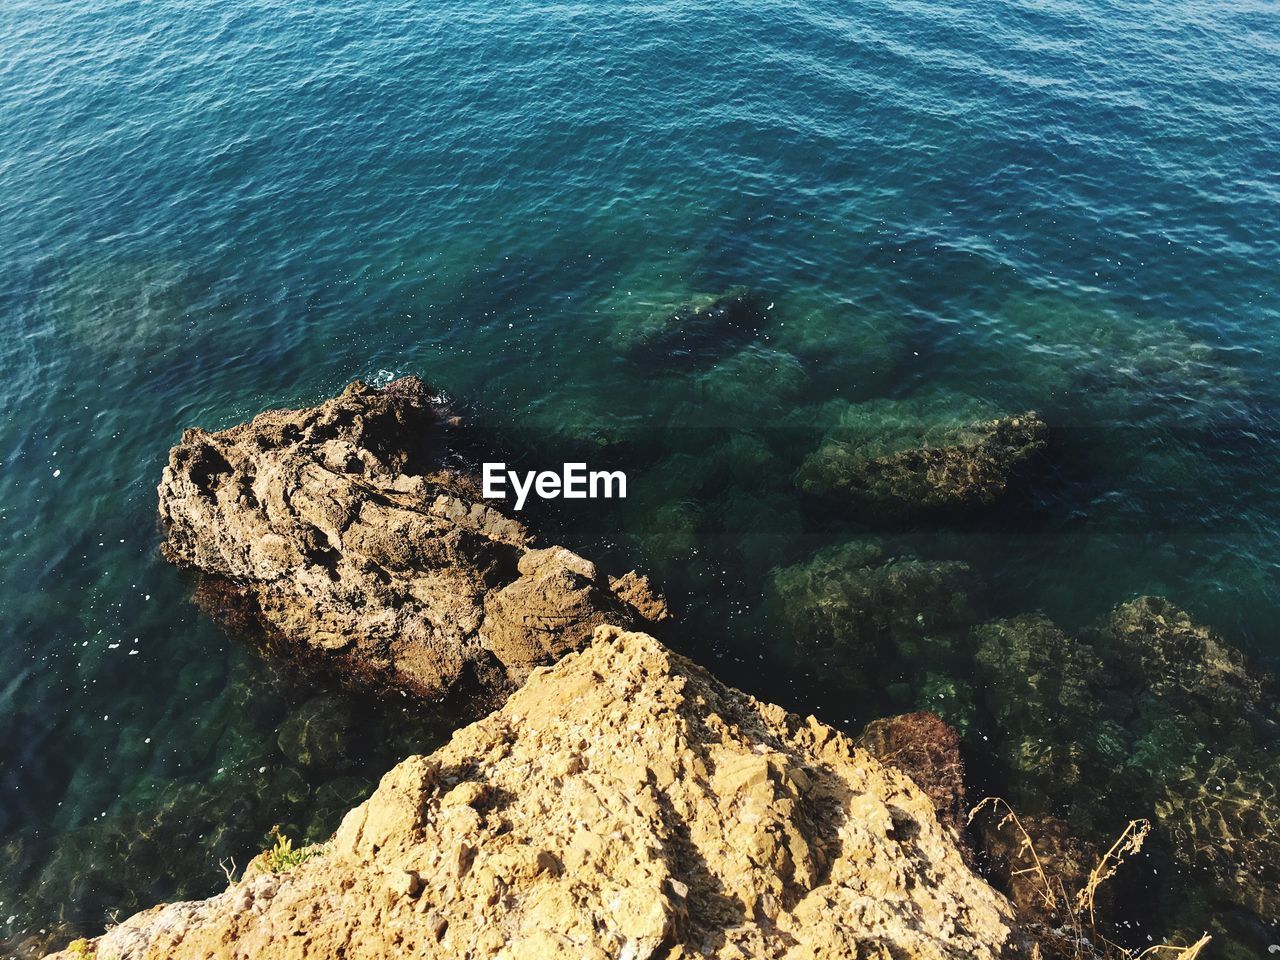 HIGH ANGLE VIEW OF SEA AND ROCK FORMATION IN WATER